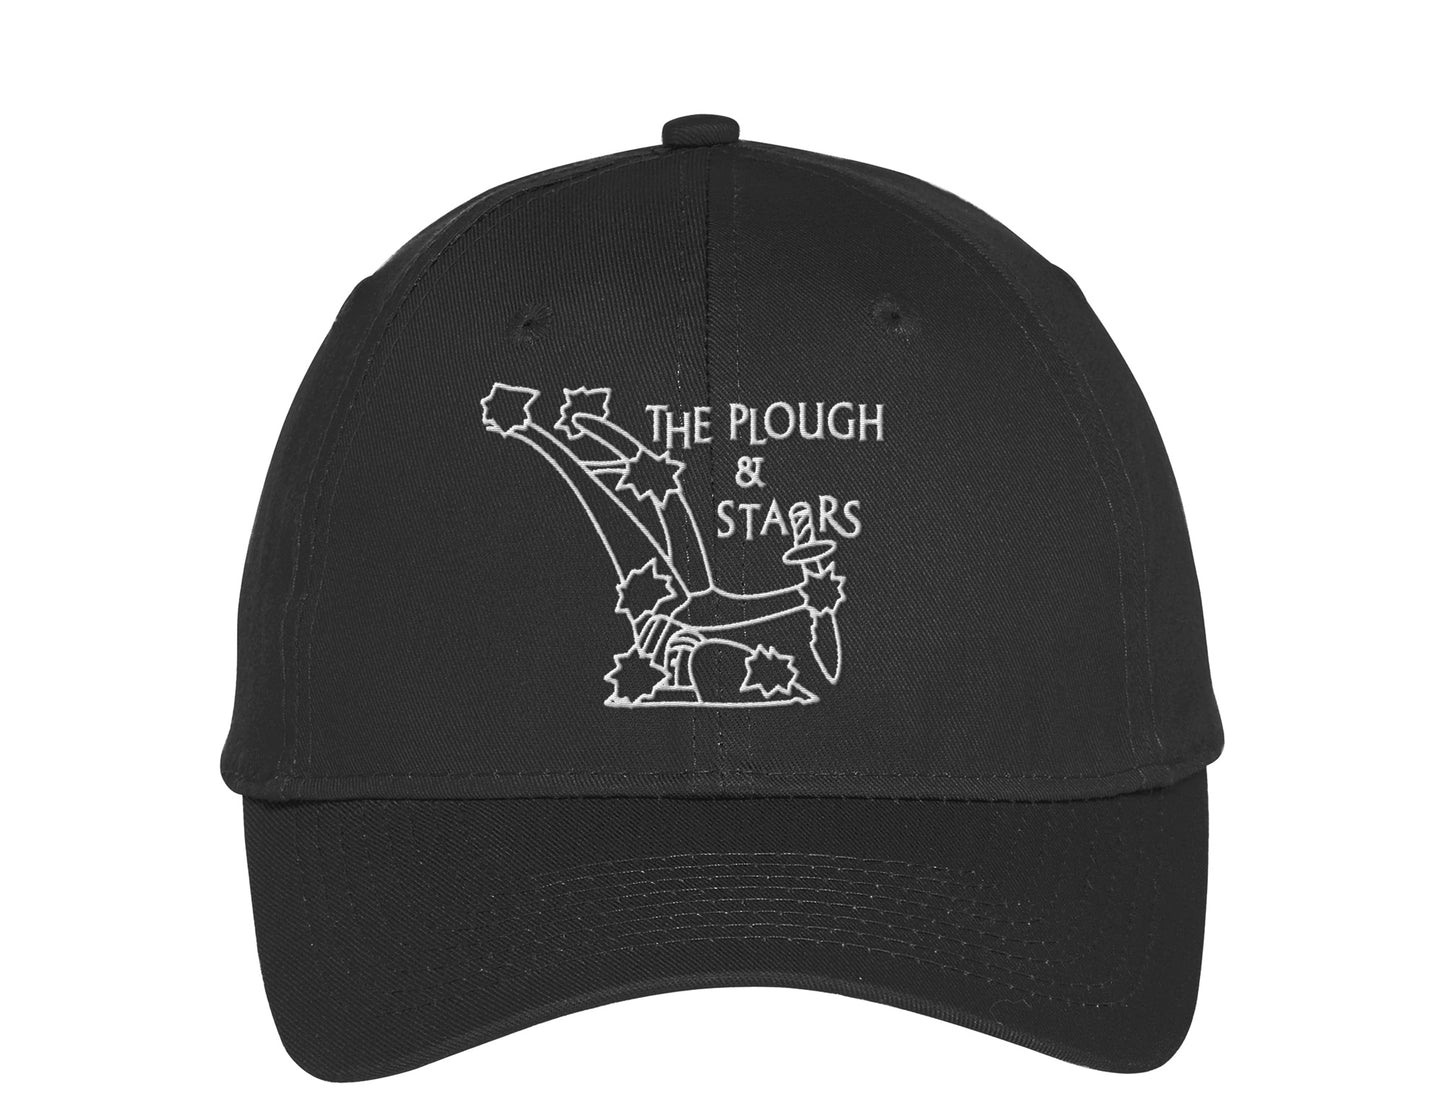 black, unstructured cap embroidered with the logo of The Plough and Stars, Cambridge, MA